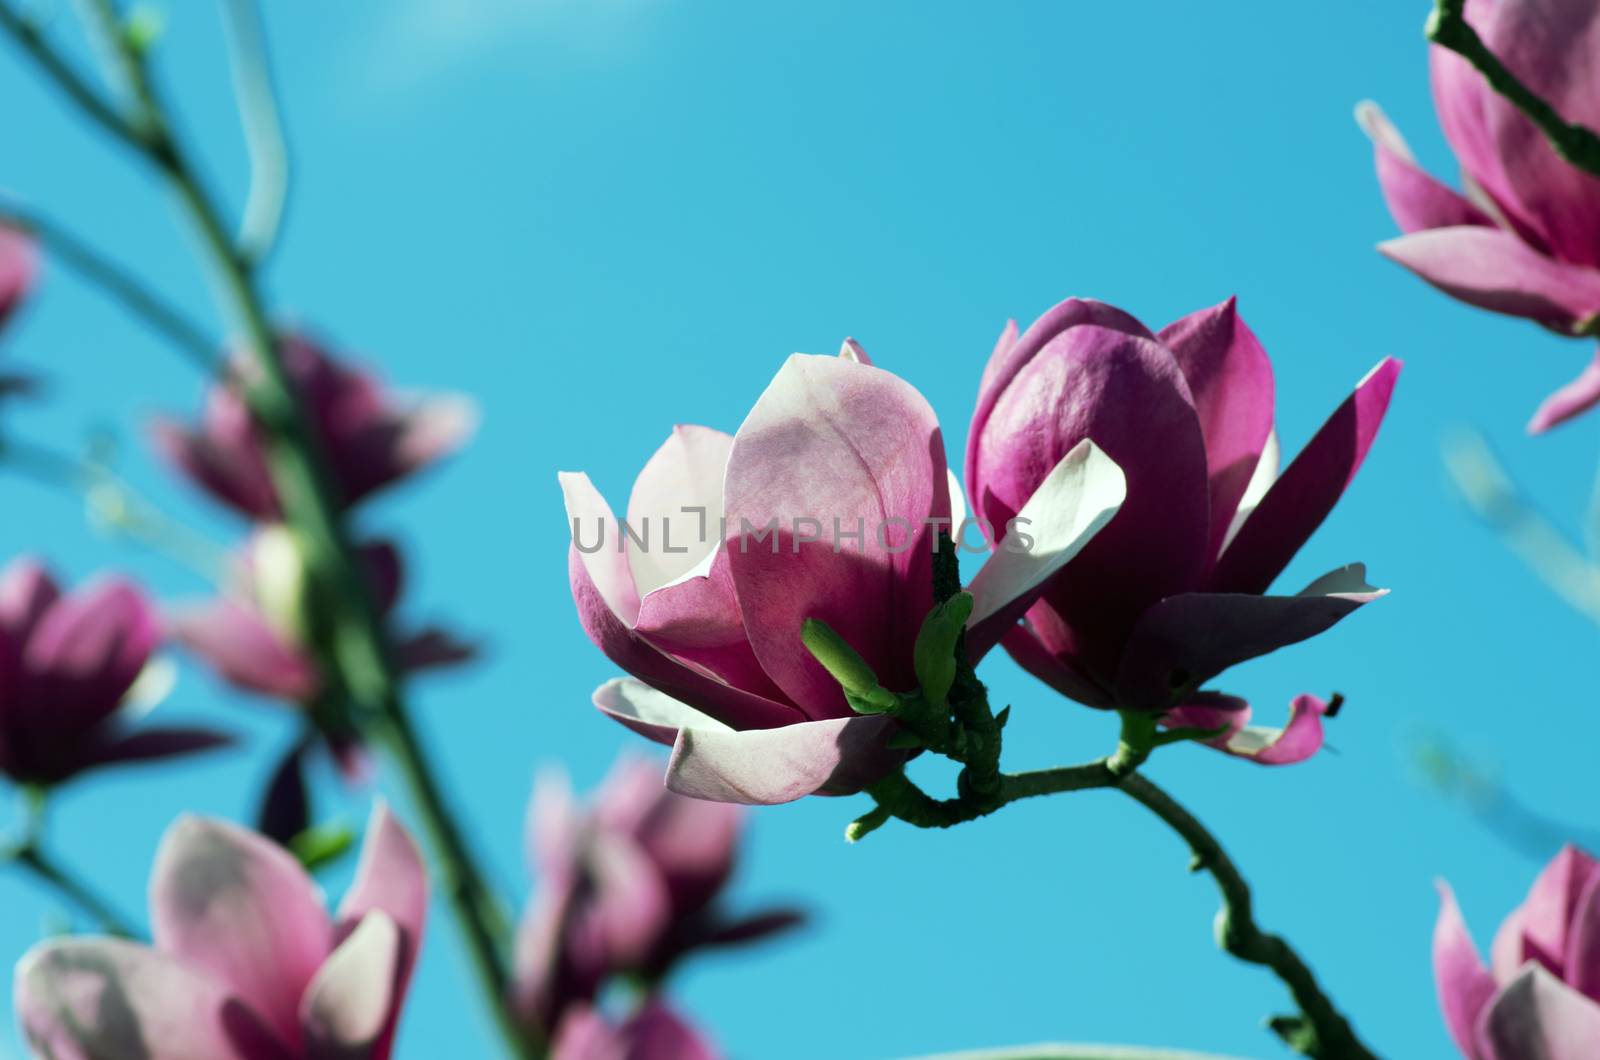 Blossoming of magnolia flowers in spring time